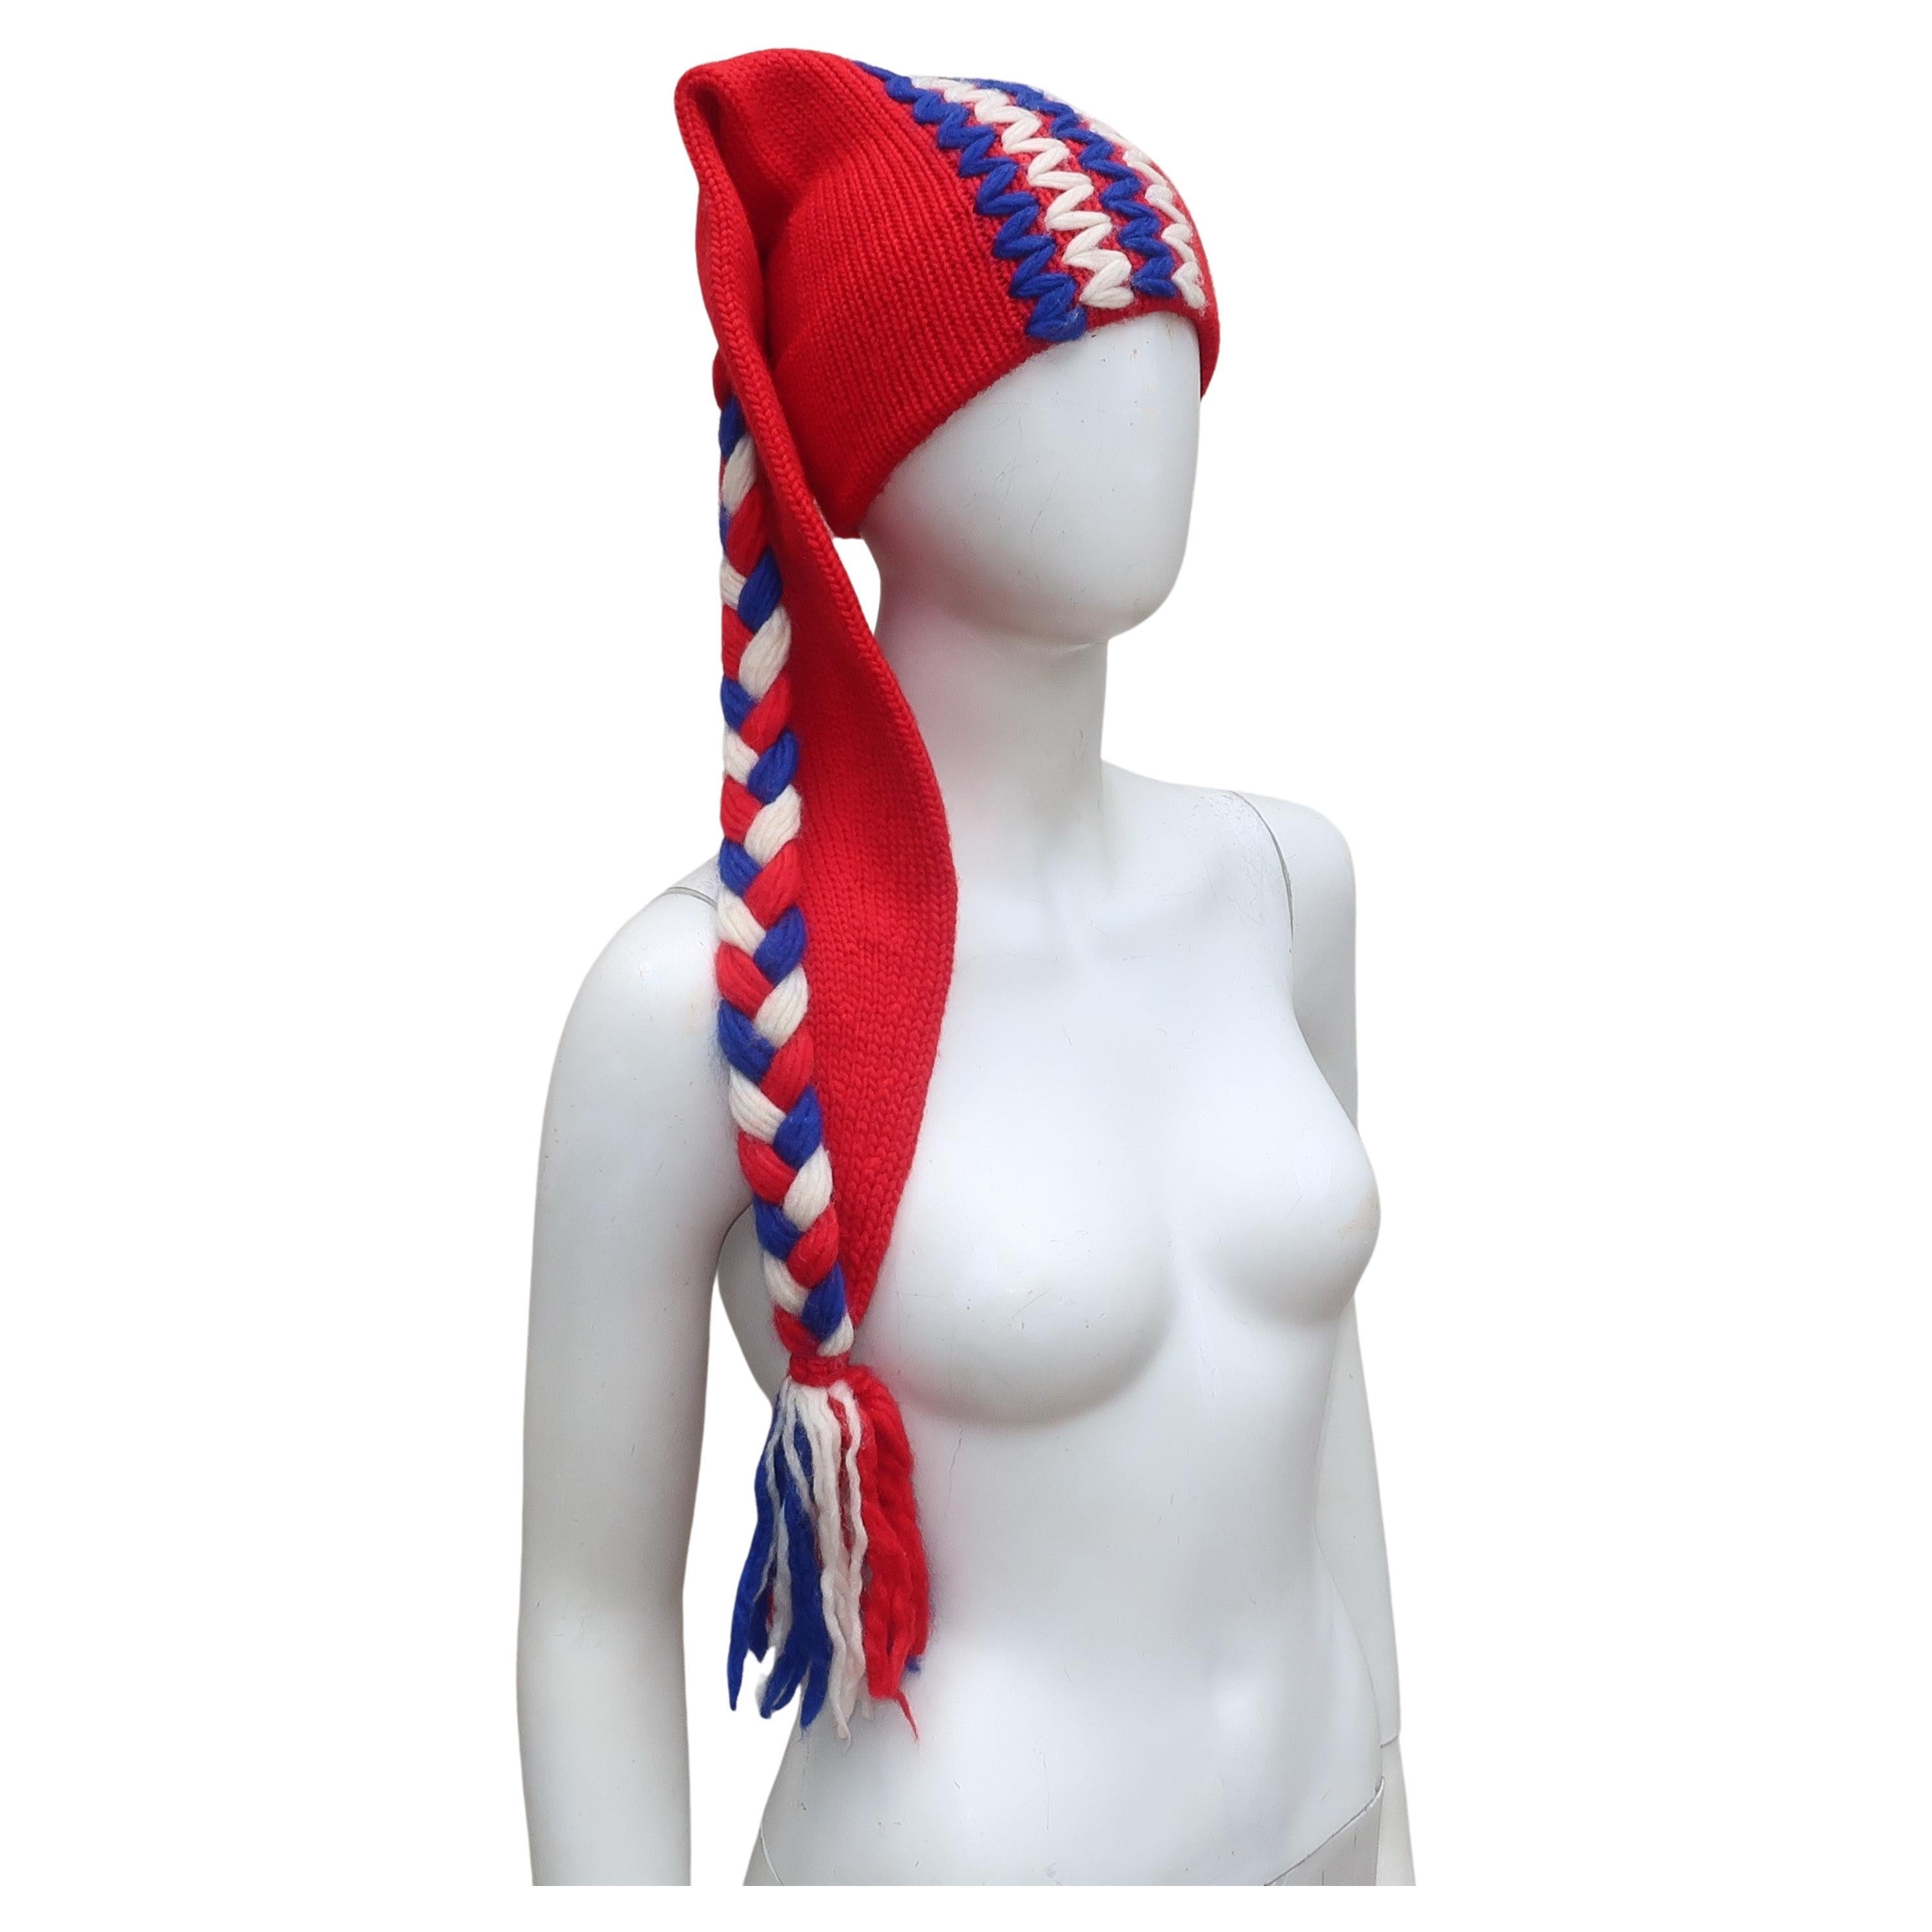 Red, White, Blue Wool Knit Extra Long Stocking Hat, C.1970